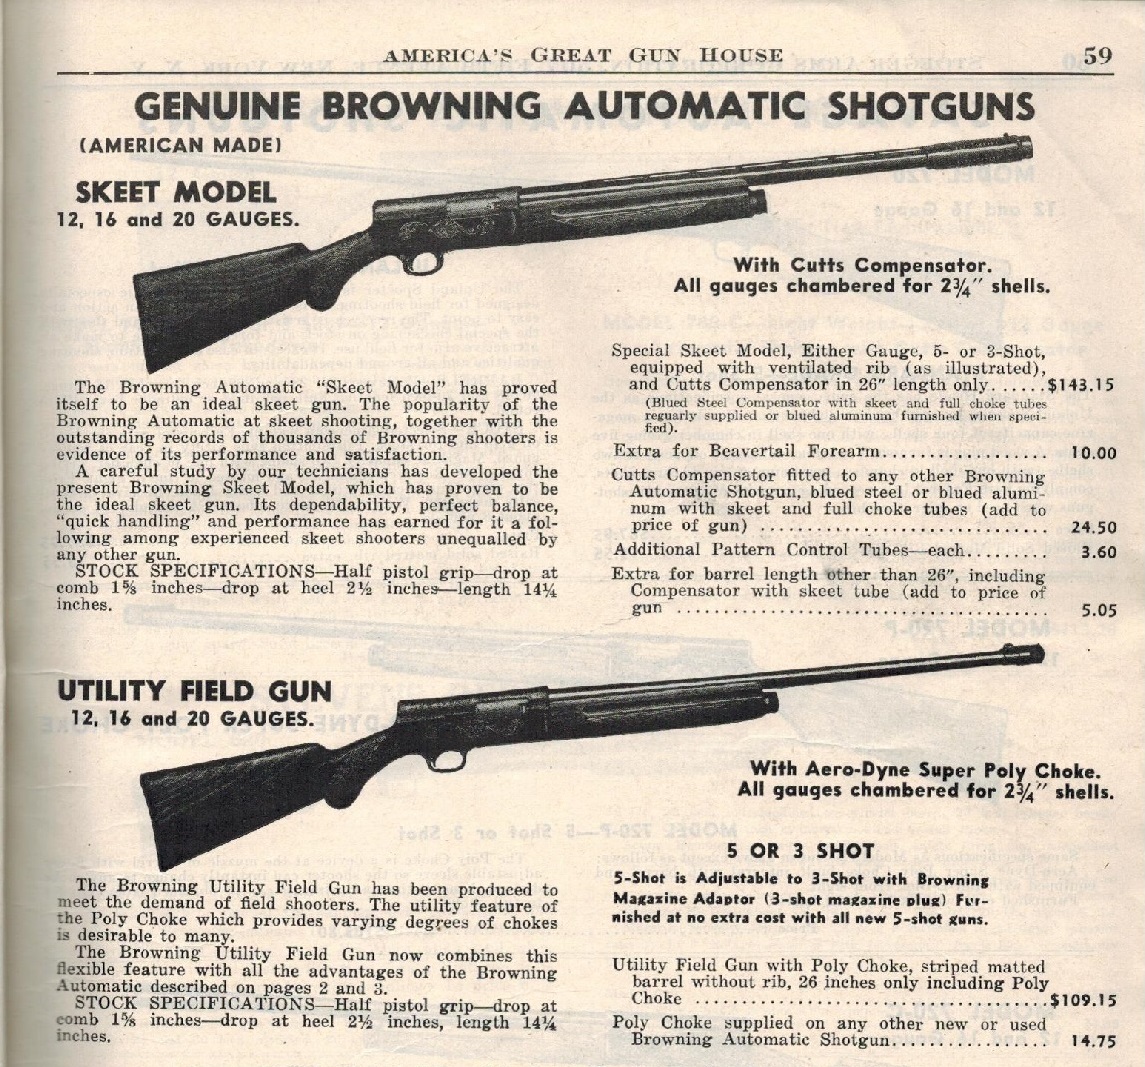 American Browning, 1948 Stoeger page 59.jpeg